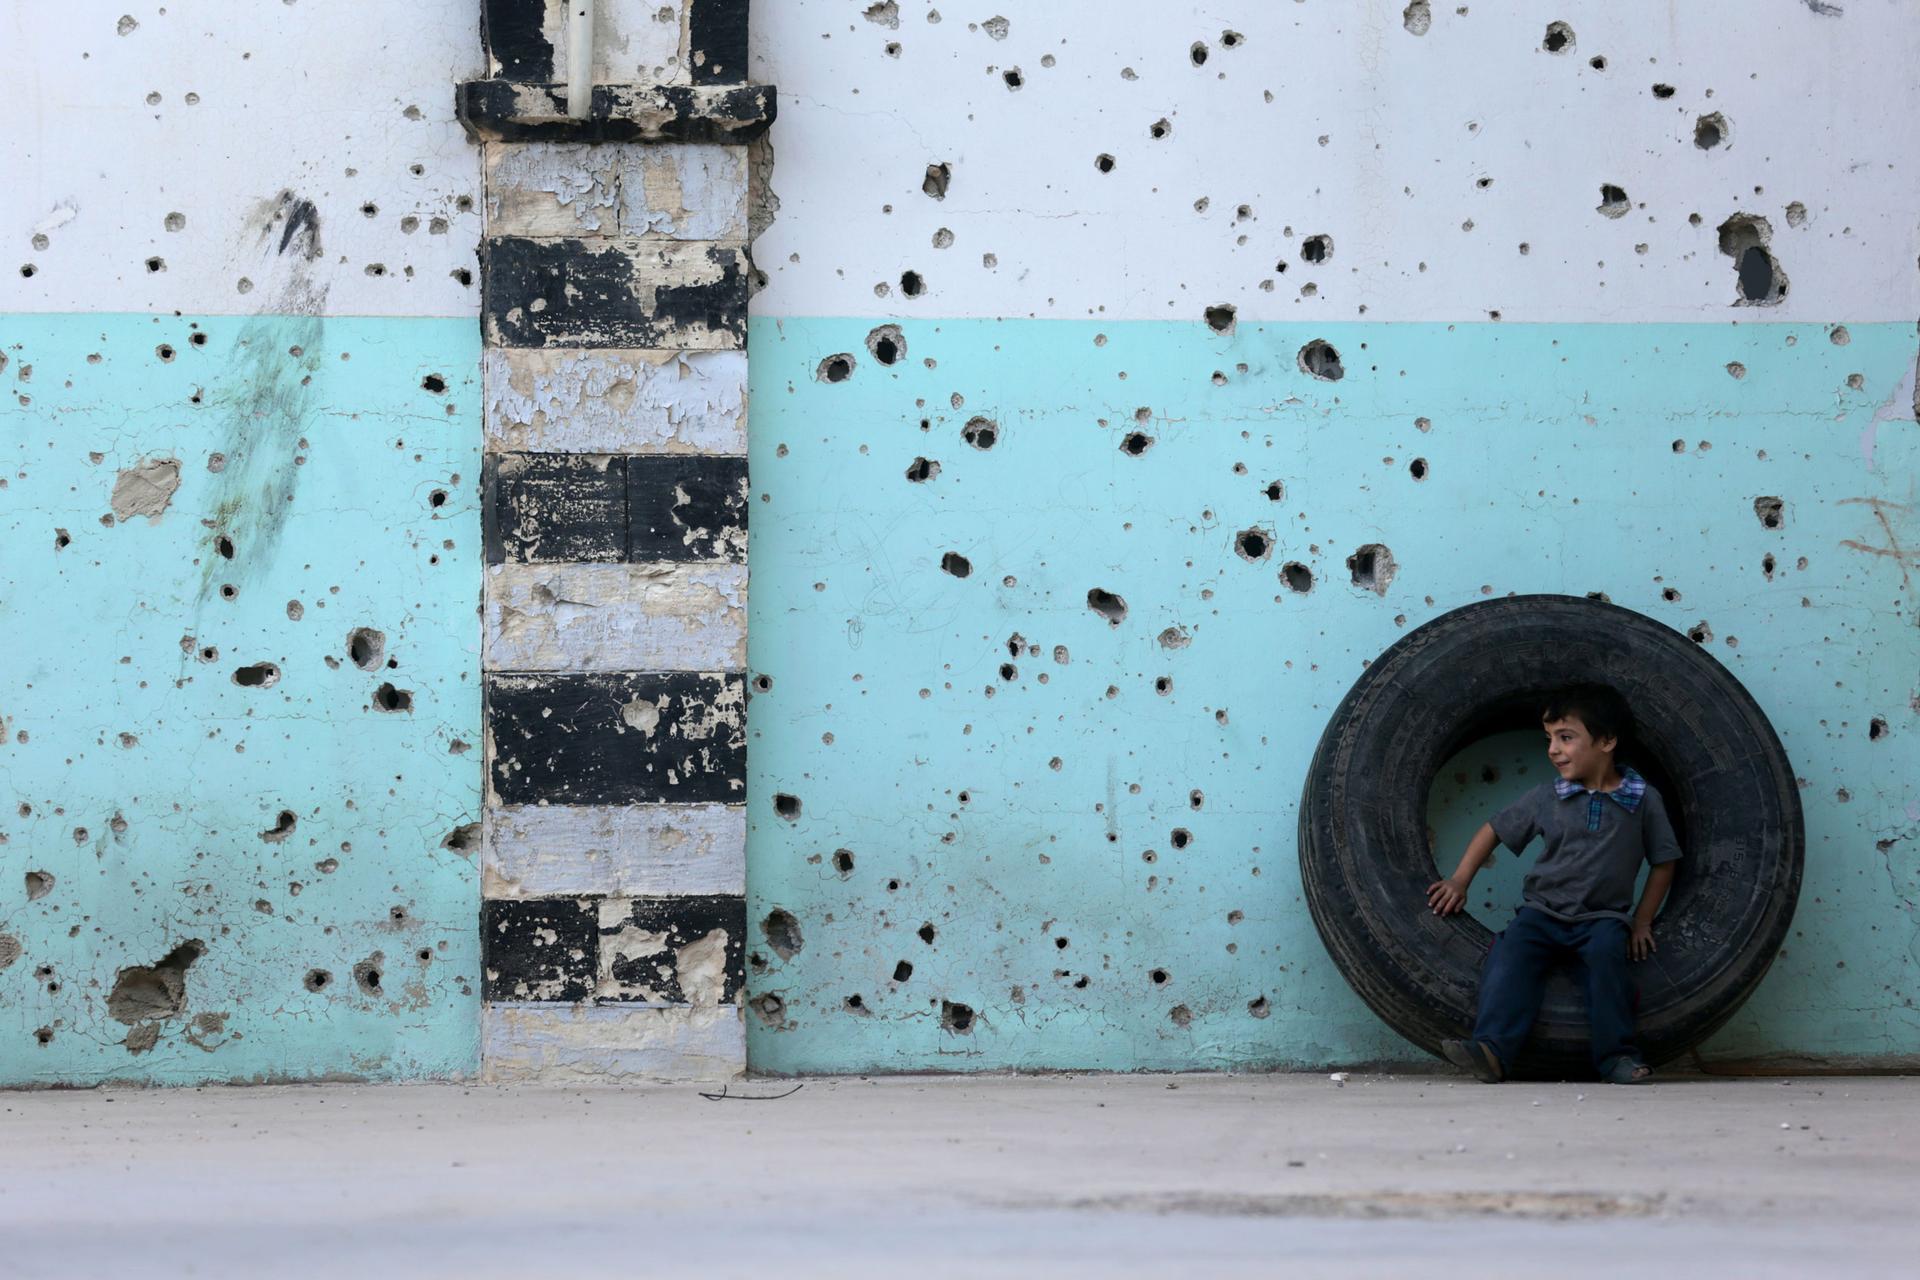 A young boy is shown sitting in a large tire against a blue wall riddled with bullet holes.